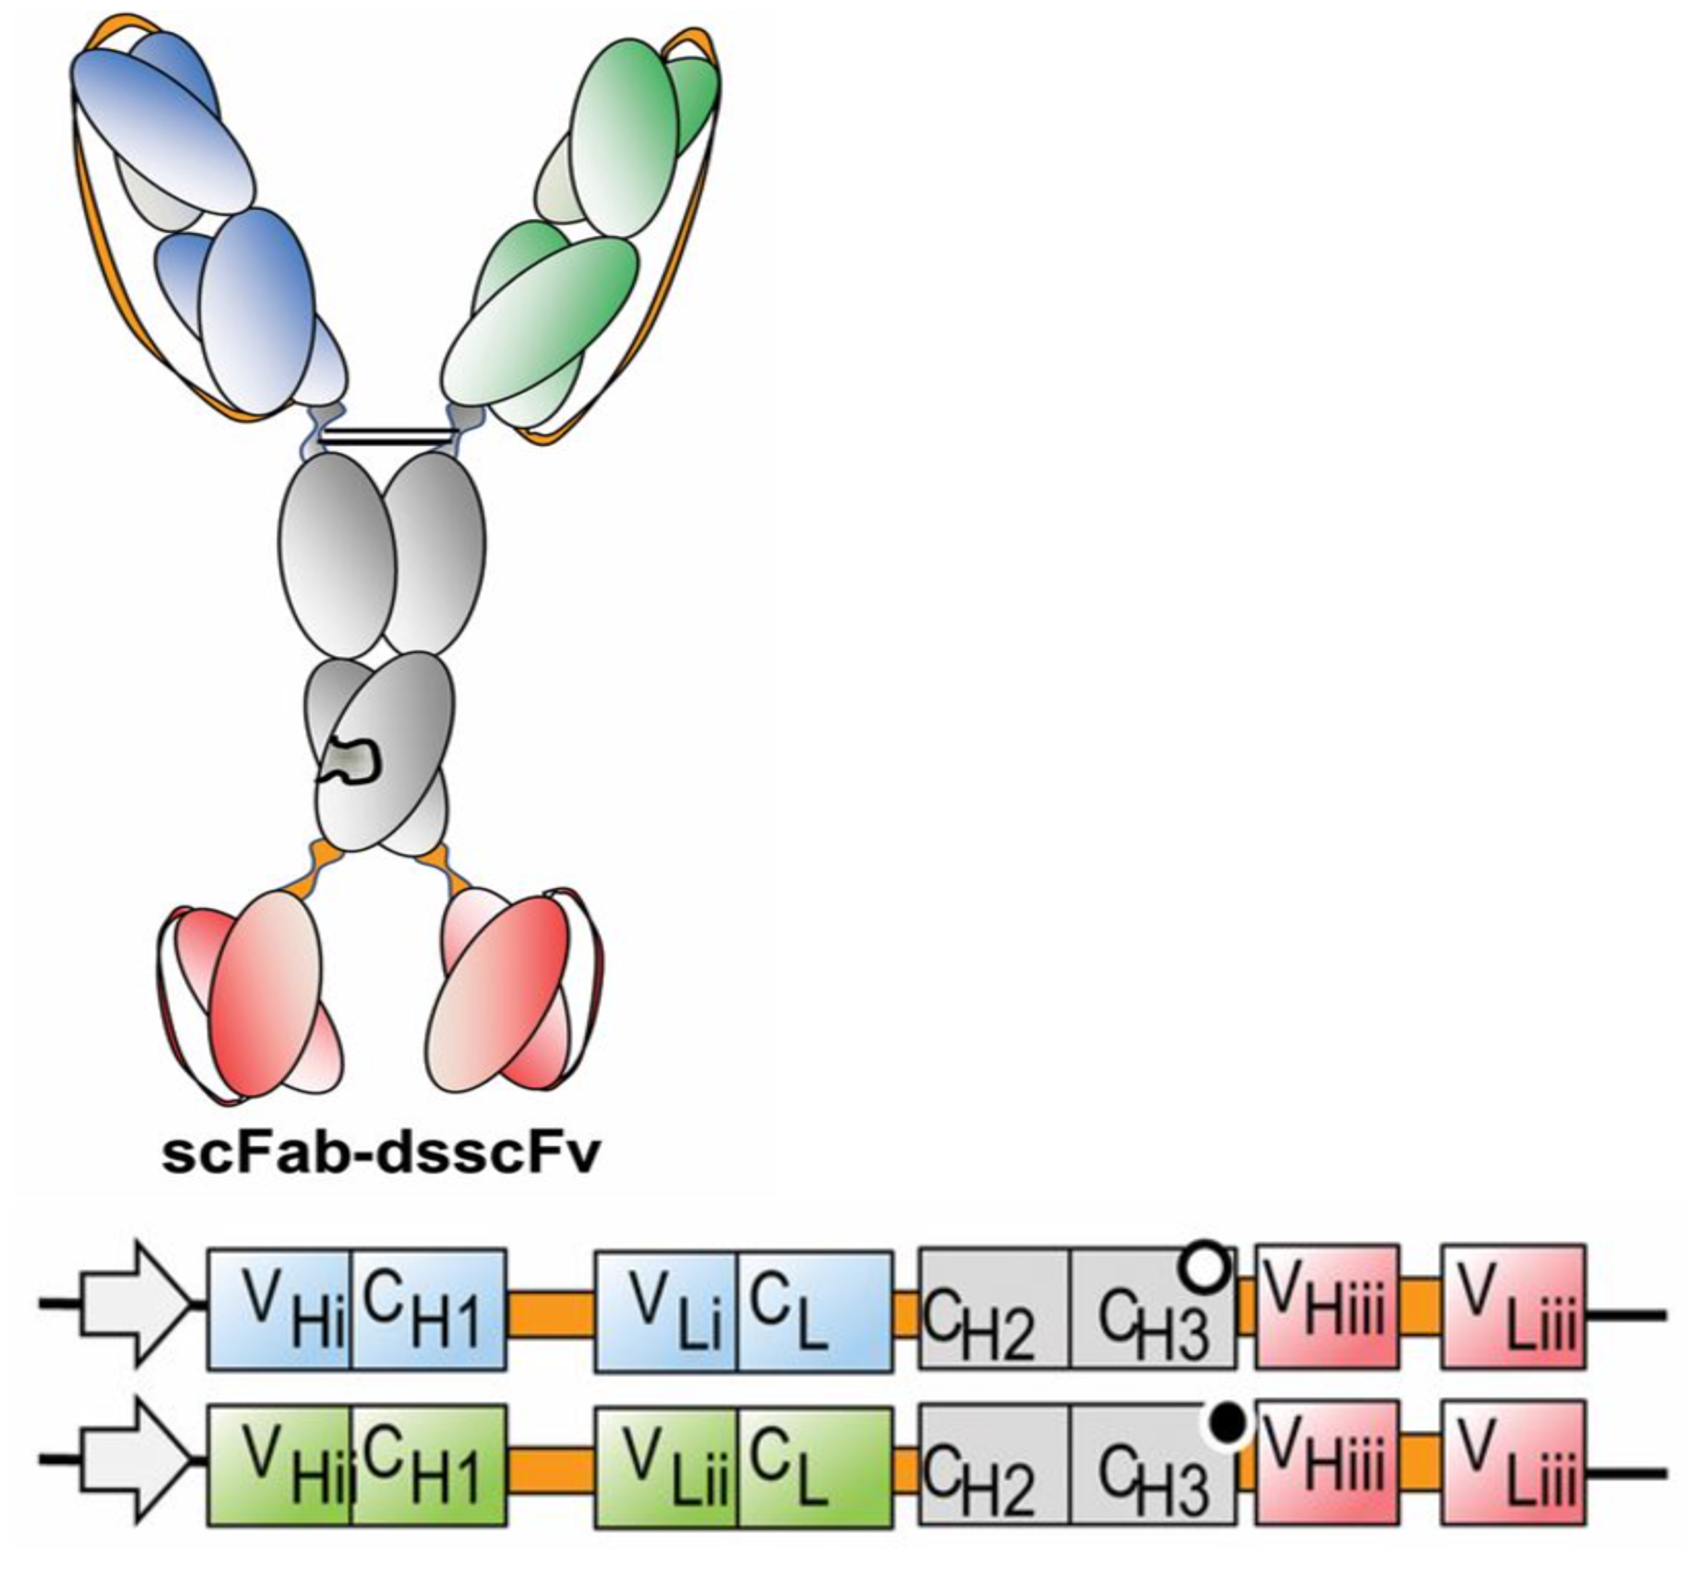 Figure 1: Designing novel multiformat antibodies—like bispecific antibodies that are built with “arms” that bind to distinct targets—creates unique challenges for researchers who must keep track of all the moving parts and explore how small design or component alterations impact activity. (Image credit: Weidle, U.H, Tiefenthaler, G., Weiss, G., et al. Cancer Genomics & Proteomics. 2013, Jan, 10 (1): 1-18.)3